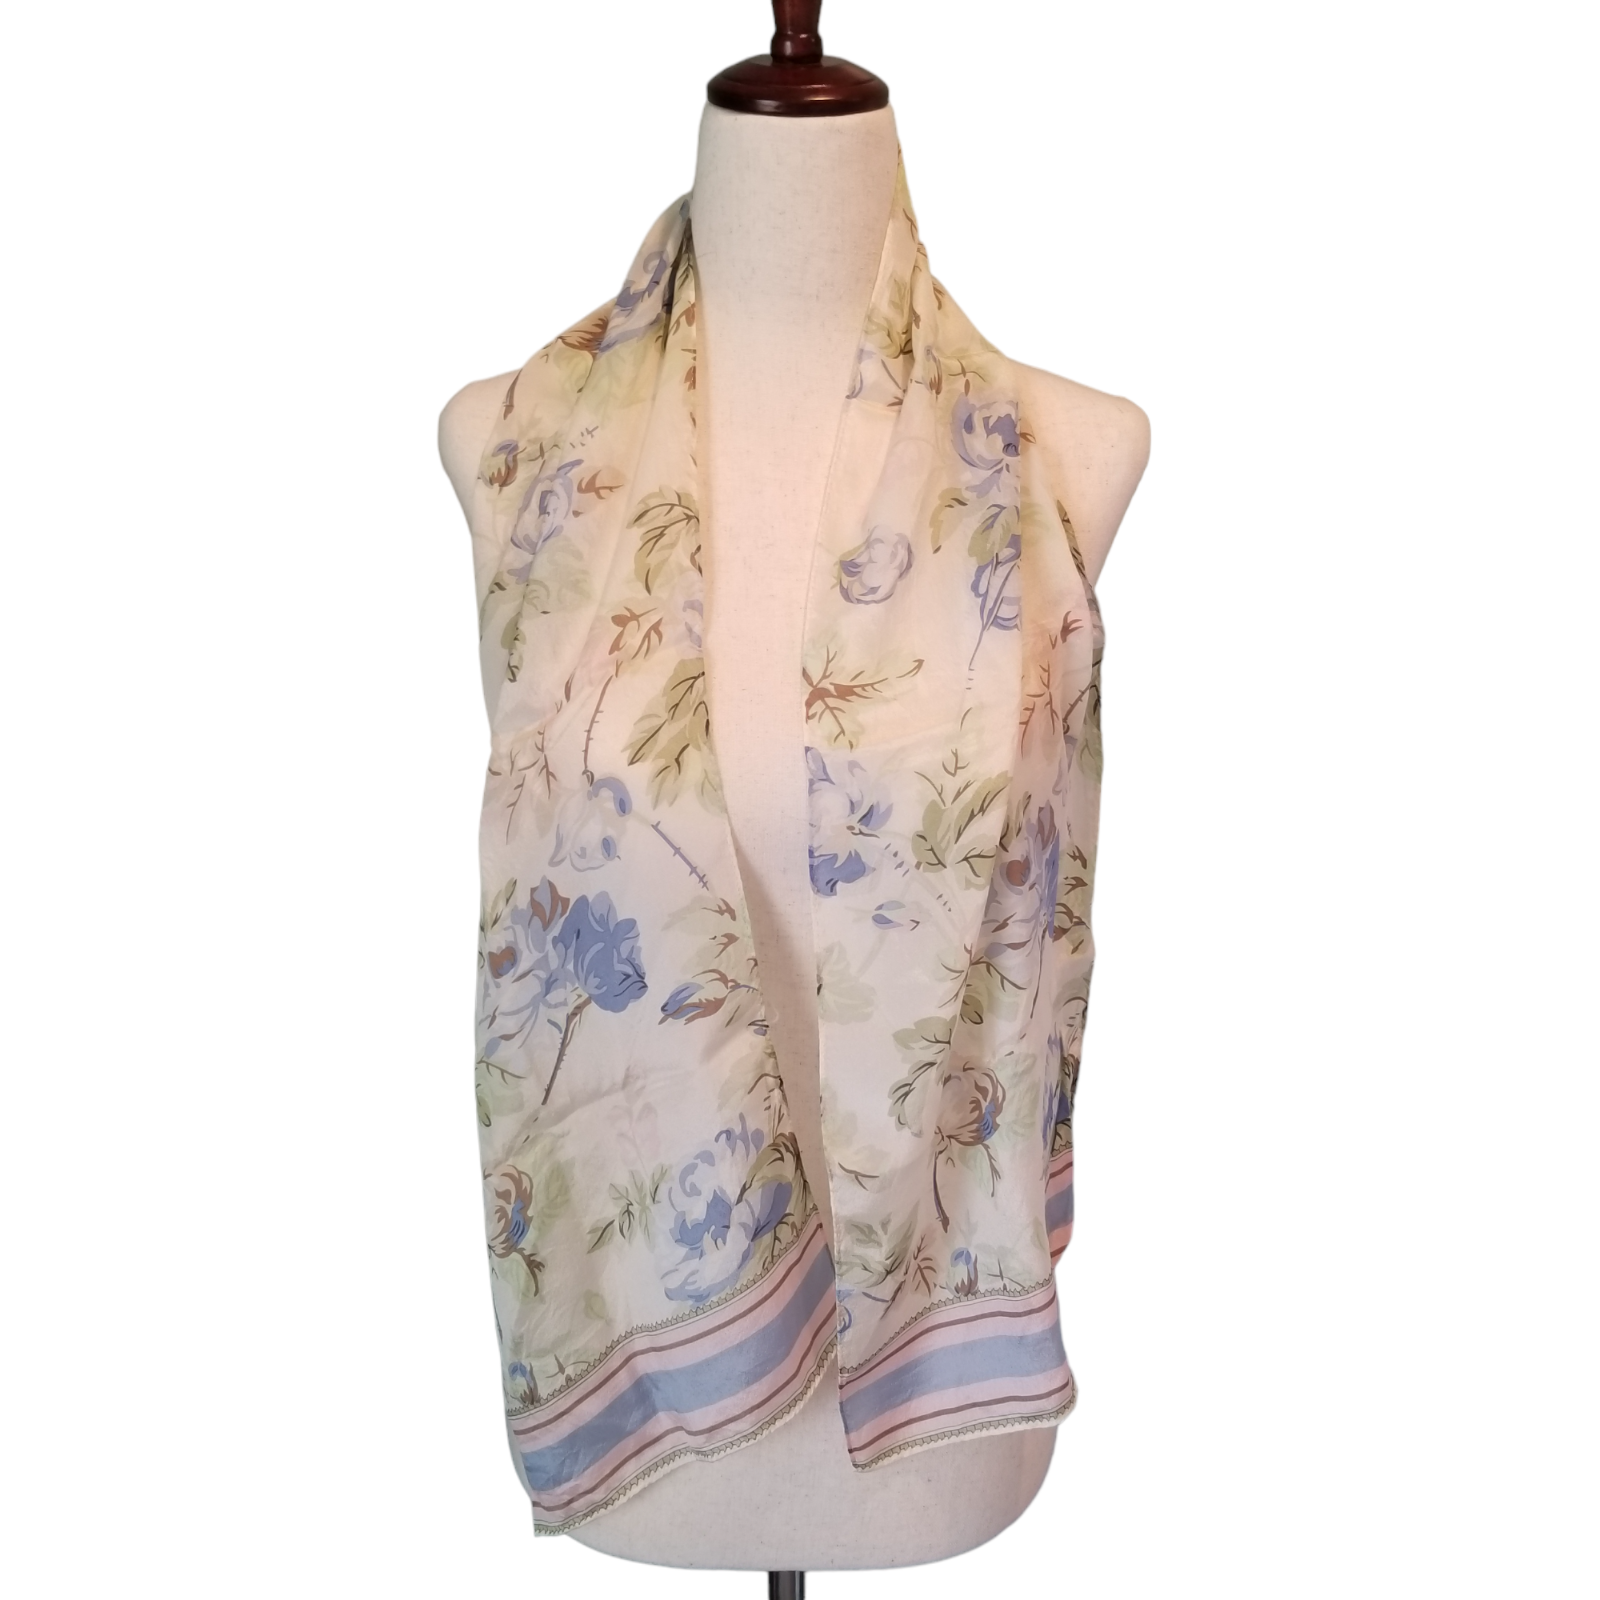 Primary image for Women's Fashion Scarf Rectangle Floral Flowers Stripes Blue Green Tan Beige Neck